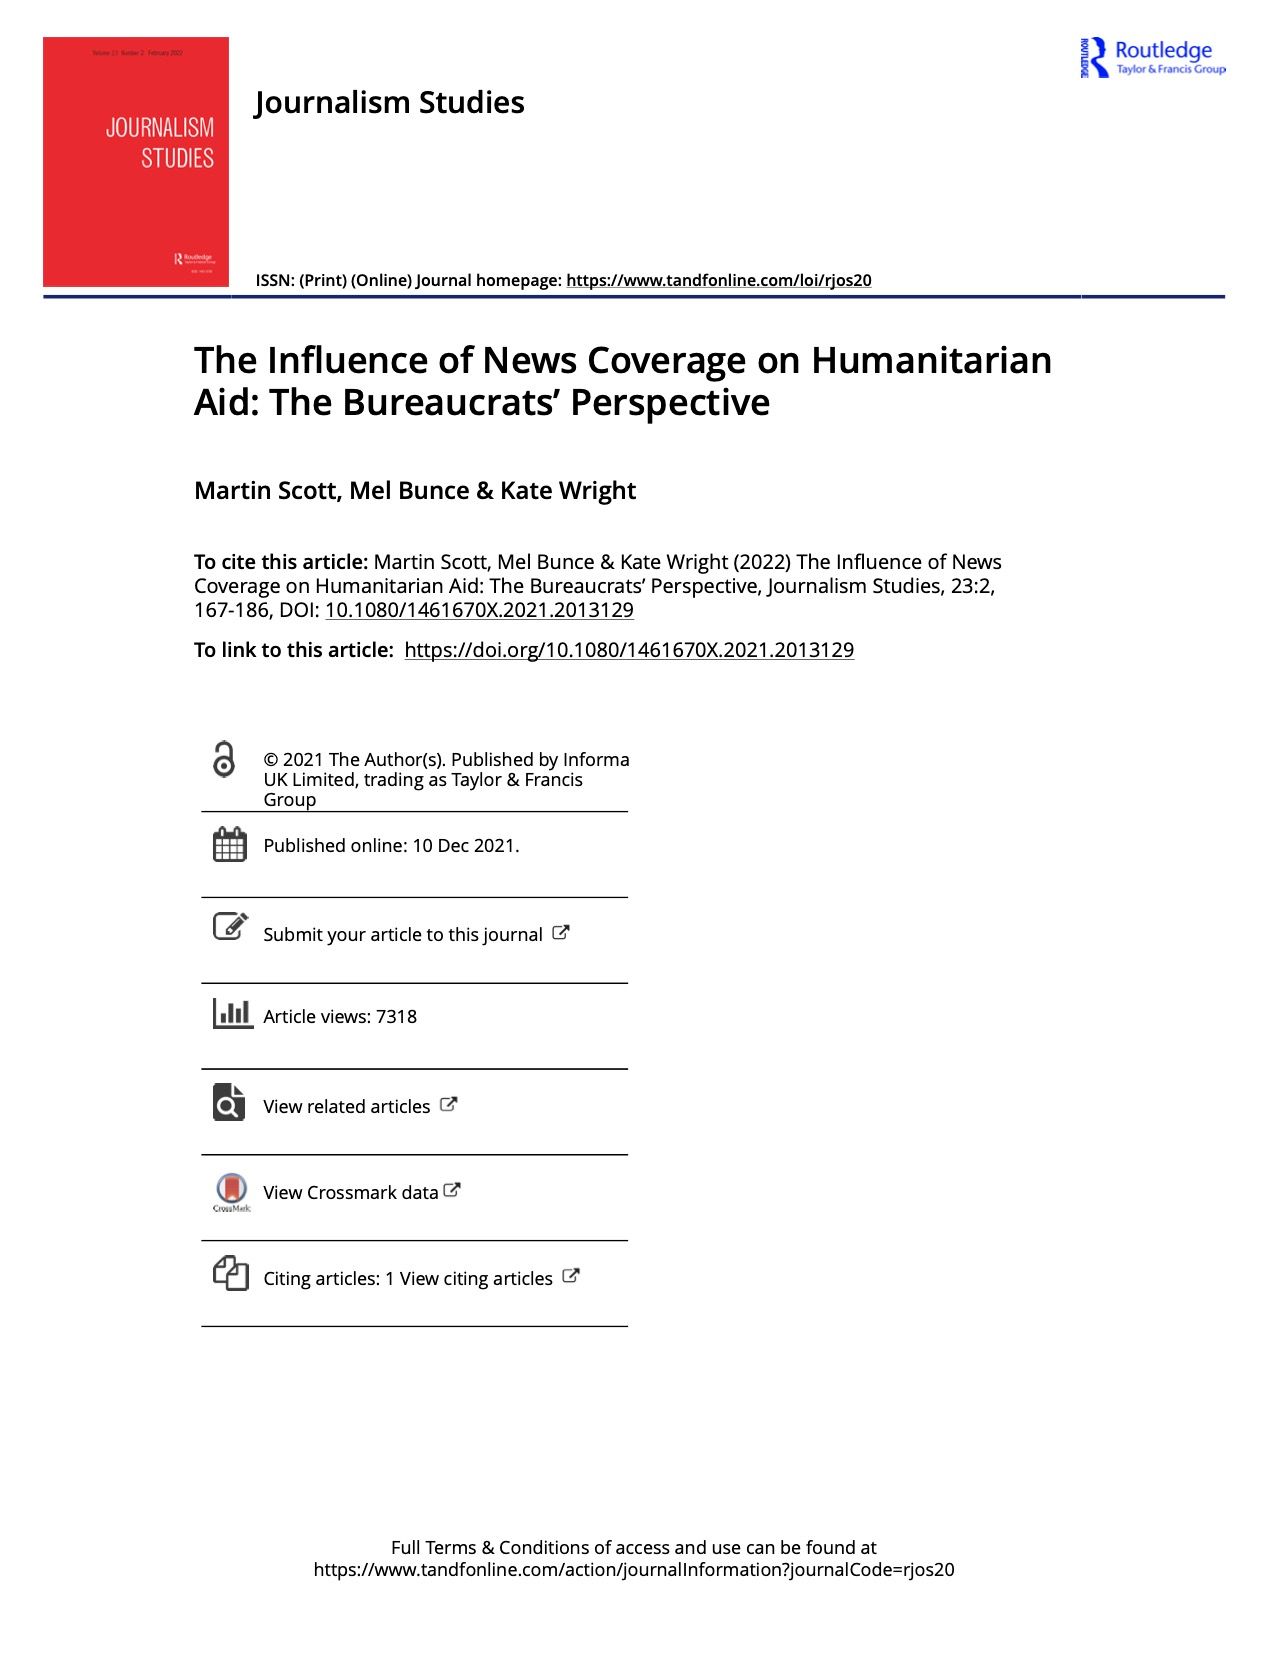 The Influence of News Coverage on Humanitarian Aid: The Bureaucrats’ Perspective